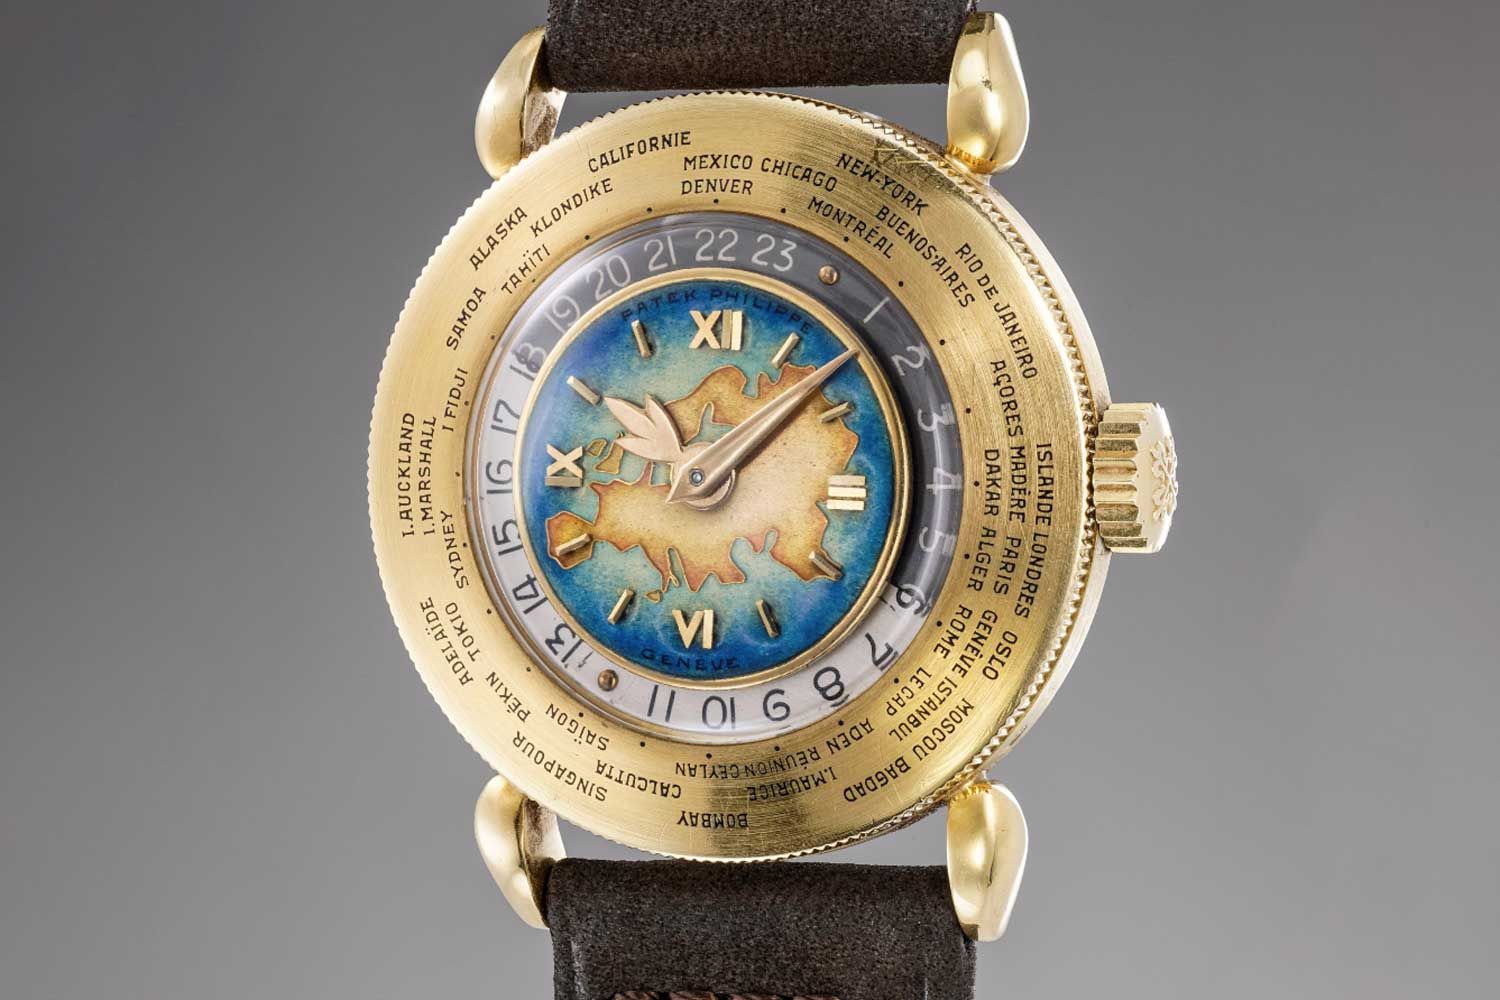 Most of the references 1415 with cloisonné enamel dials feature the European continent with only two known examples featuring a Euro-Asian or “Eurasia” map. Seen here is a rare example of the "Eurasia" polychrome cloisonné enamel dial ref. 1415 sold by Phillips in 2018 (image: Phillips)